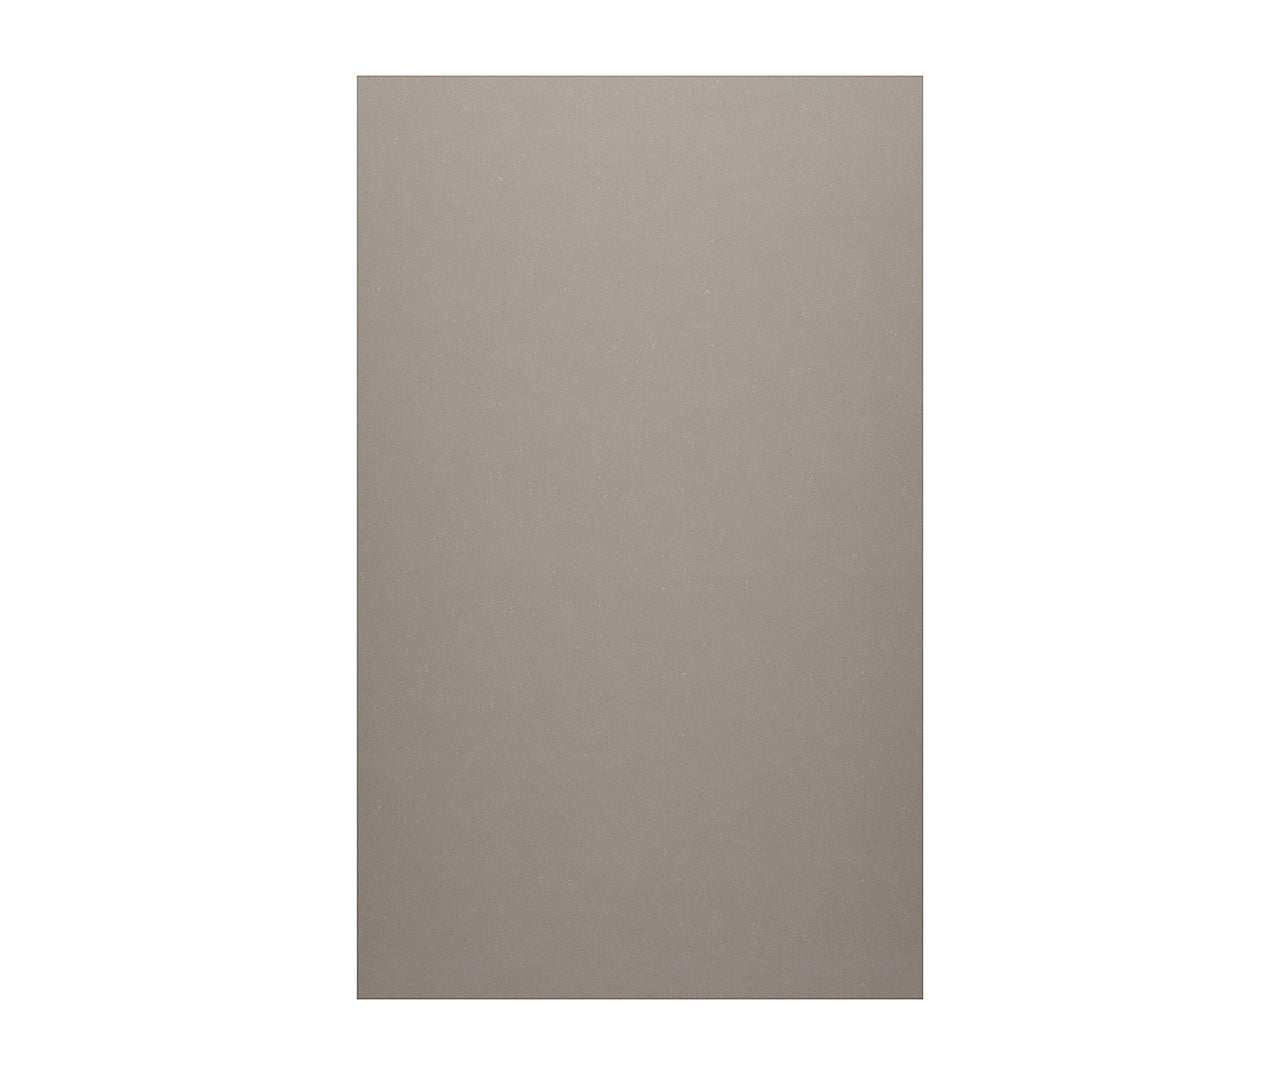 SS-3672-1 36 x 72 Swanstone Smooth Glue up Bathtub and Shower Single Wall Panel in Clay